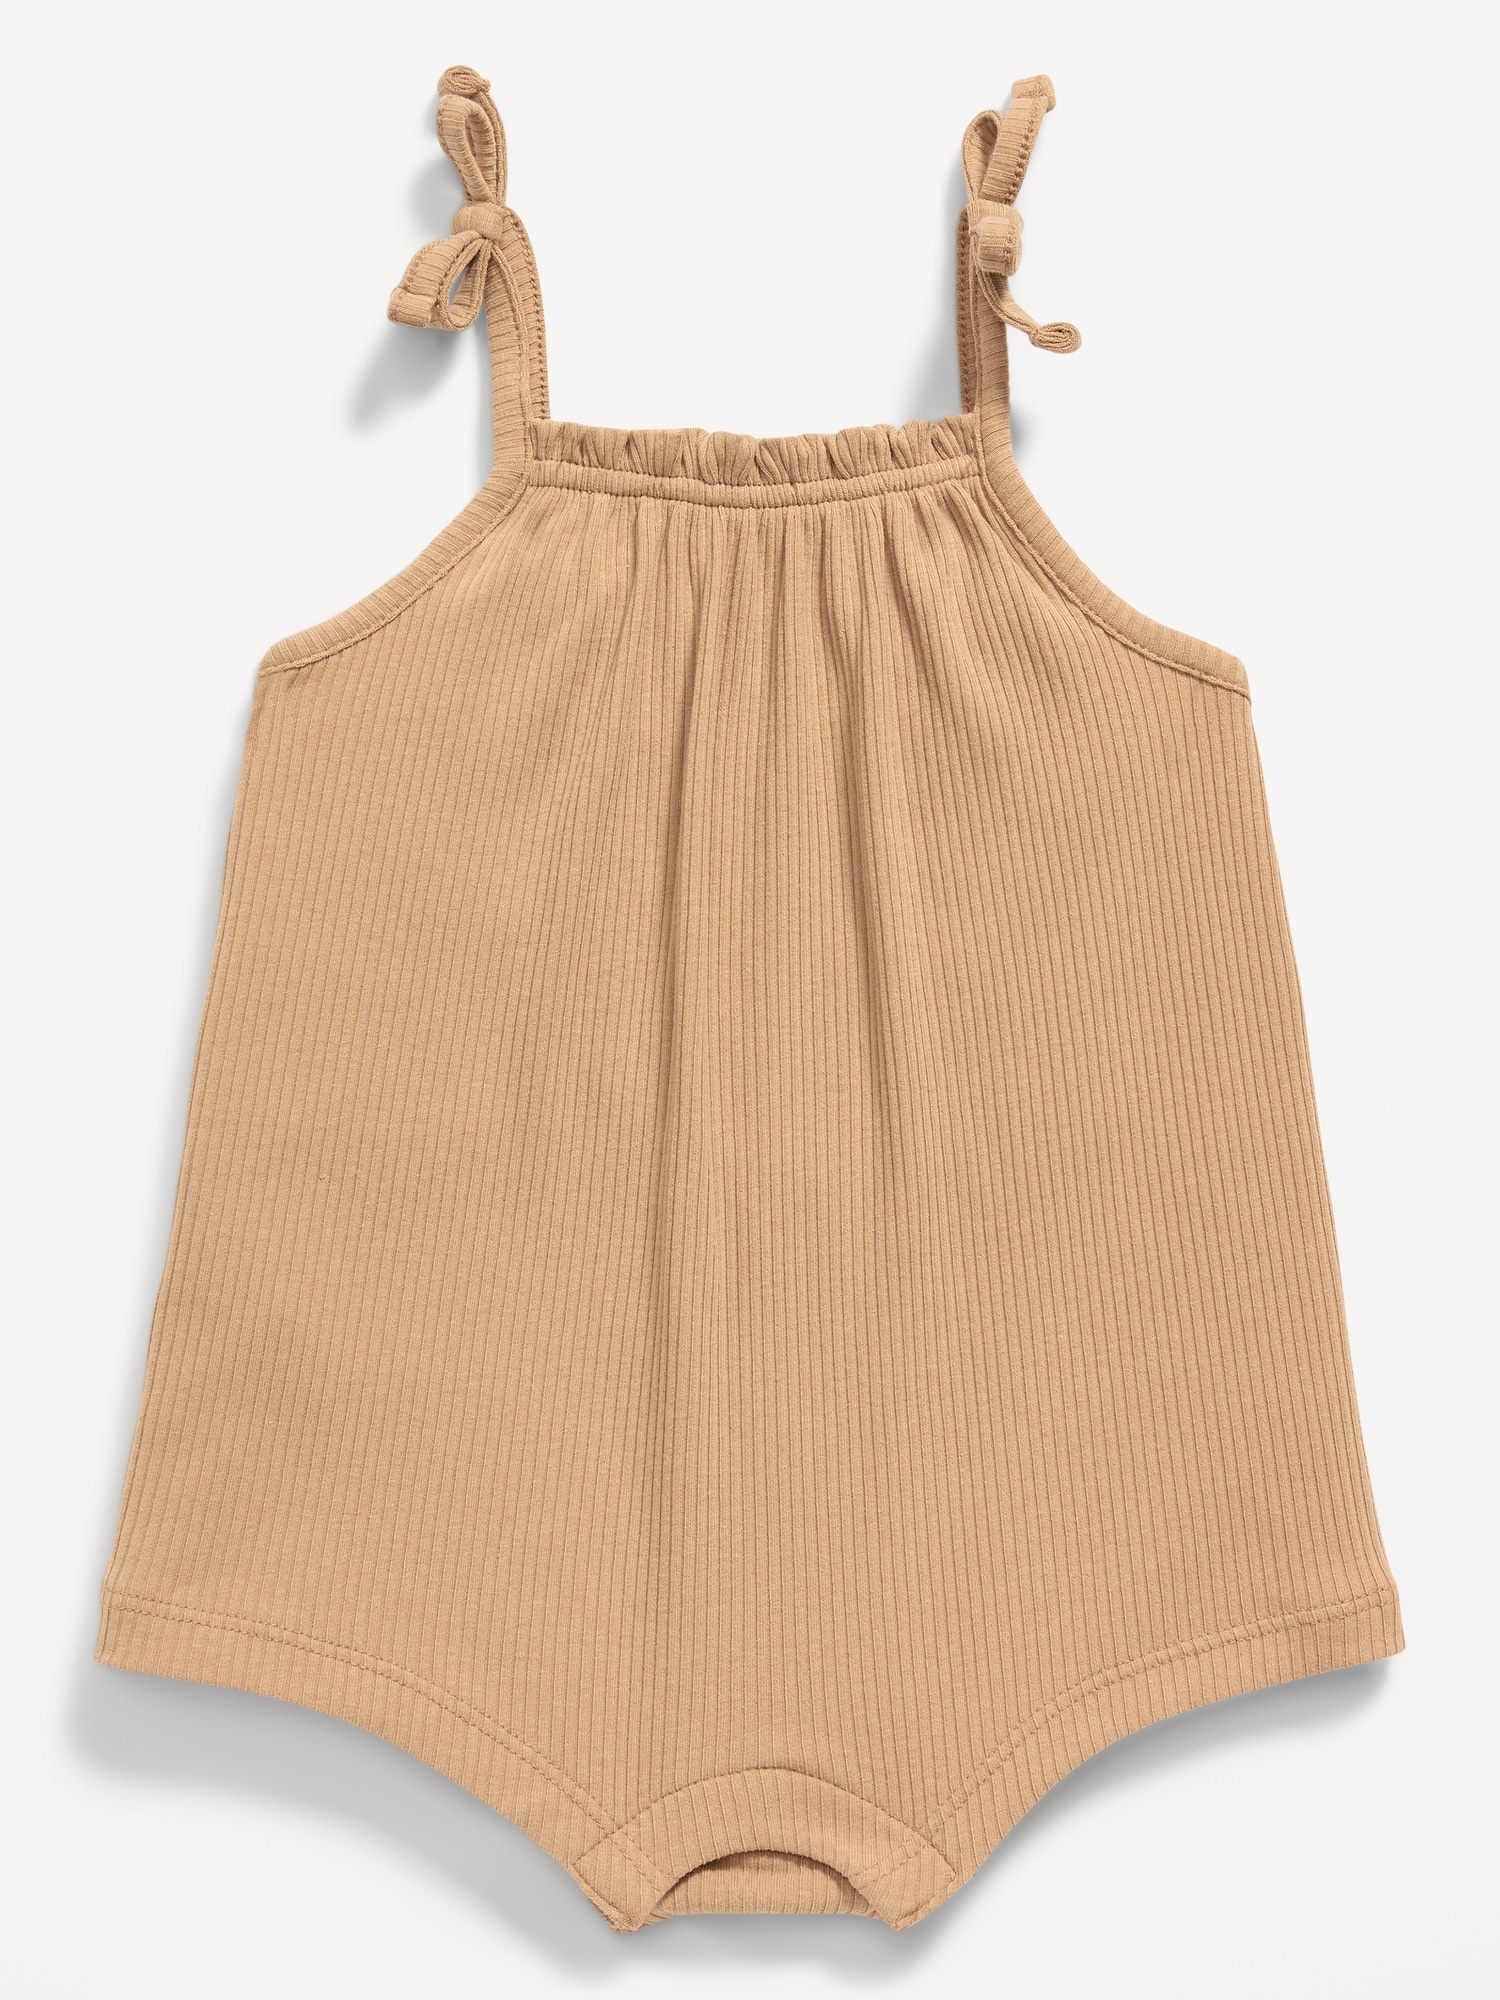 Sleeveless Tie-Bow One-Piece Romper for Baby